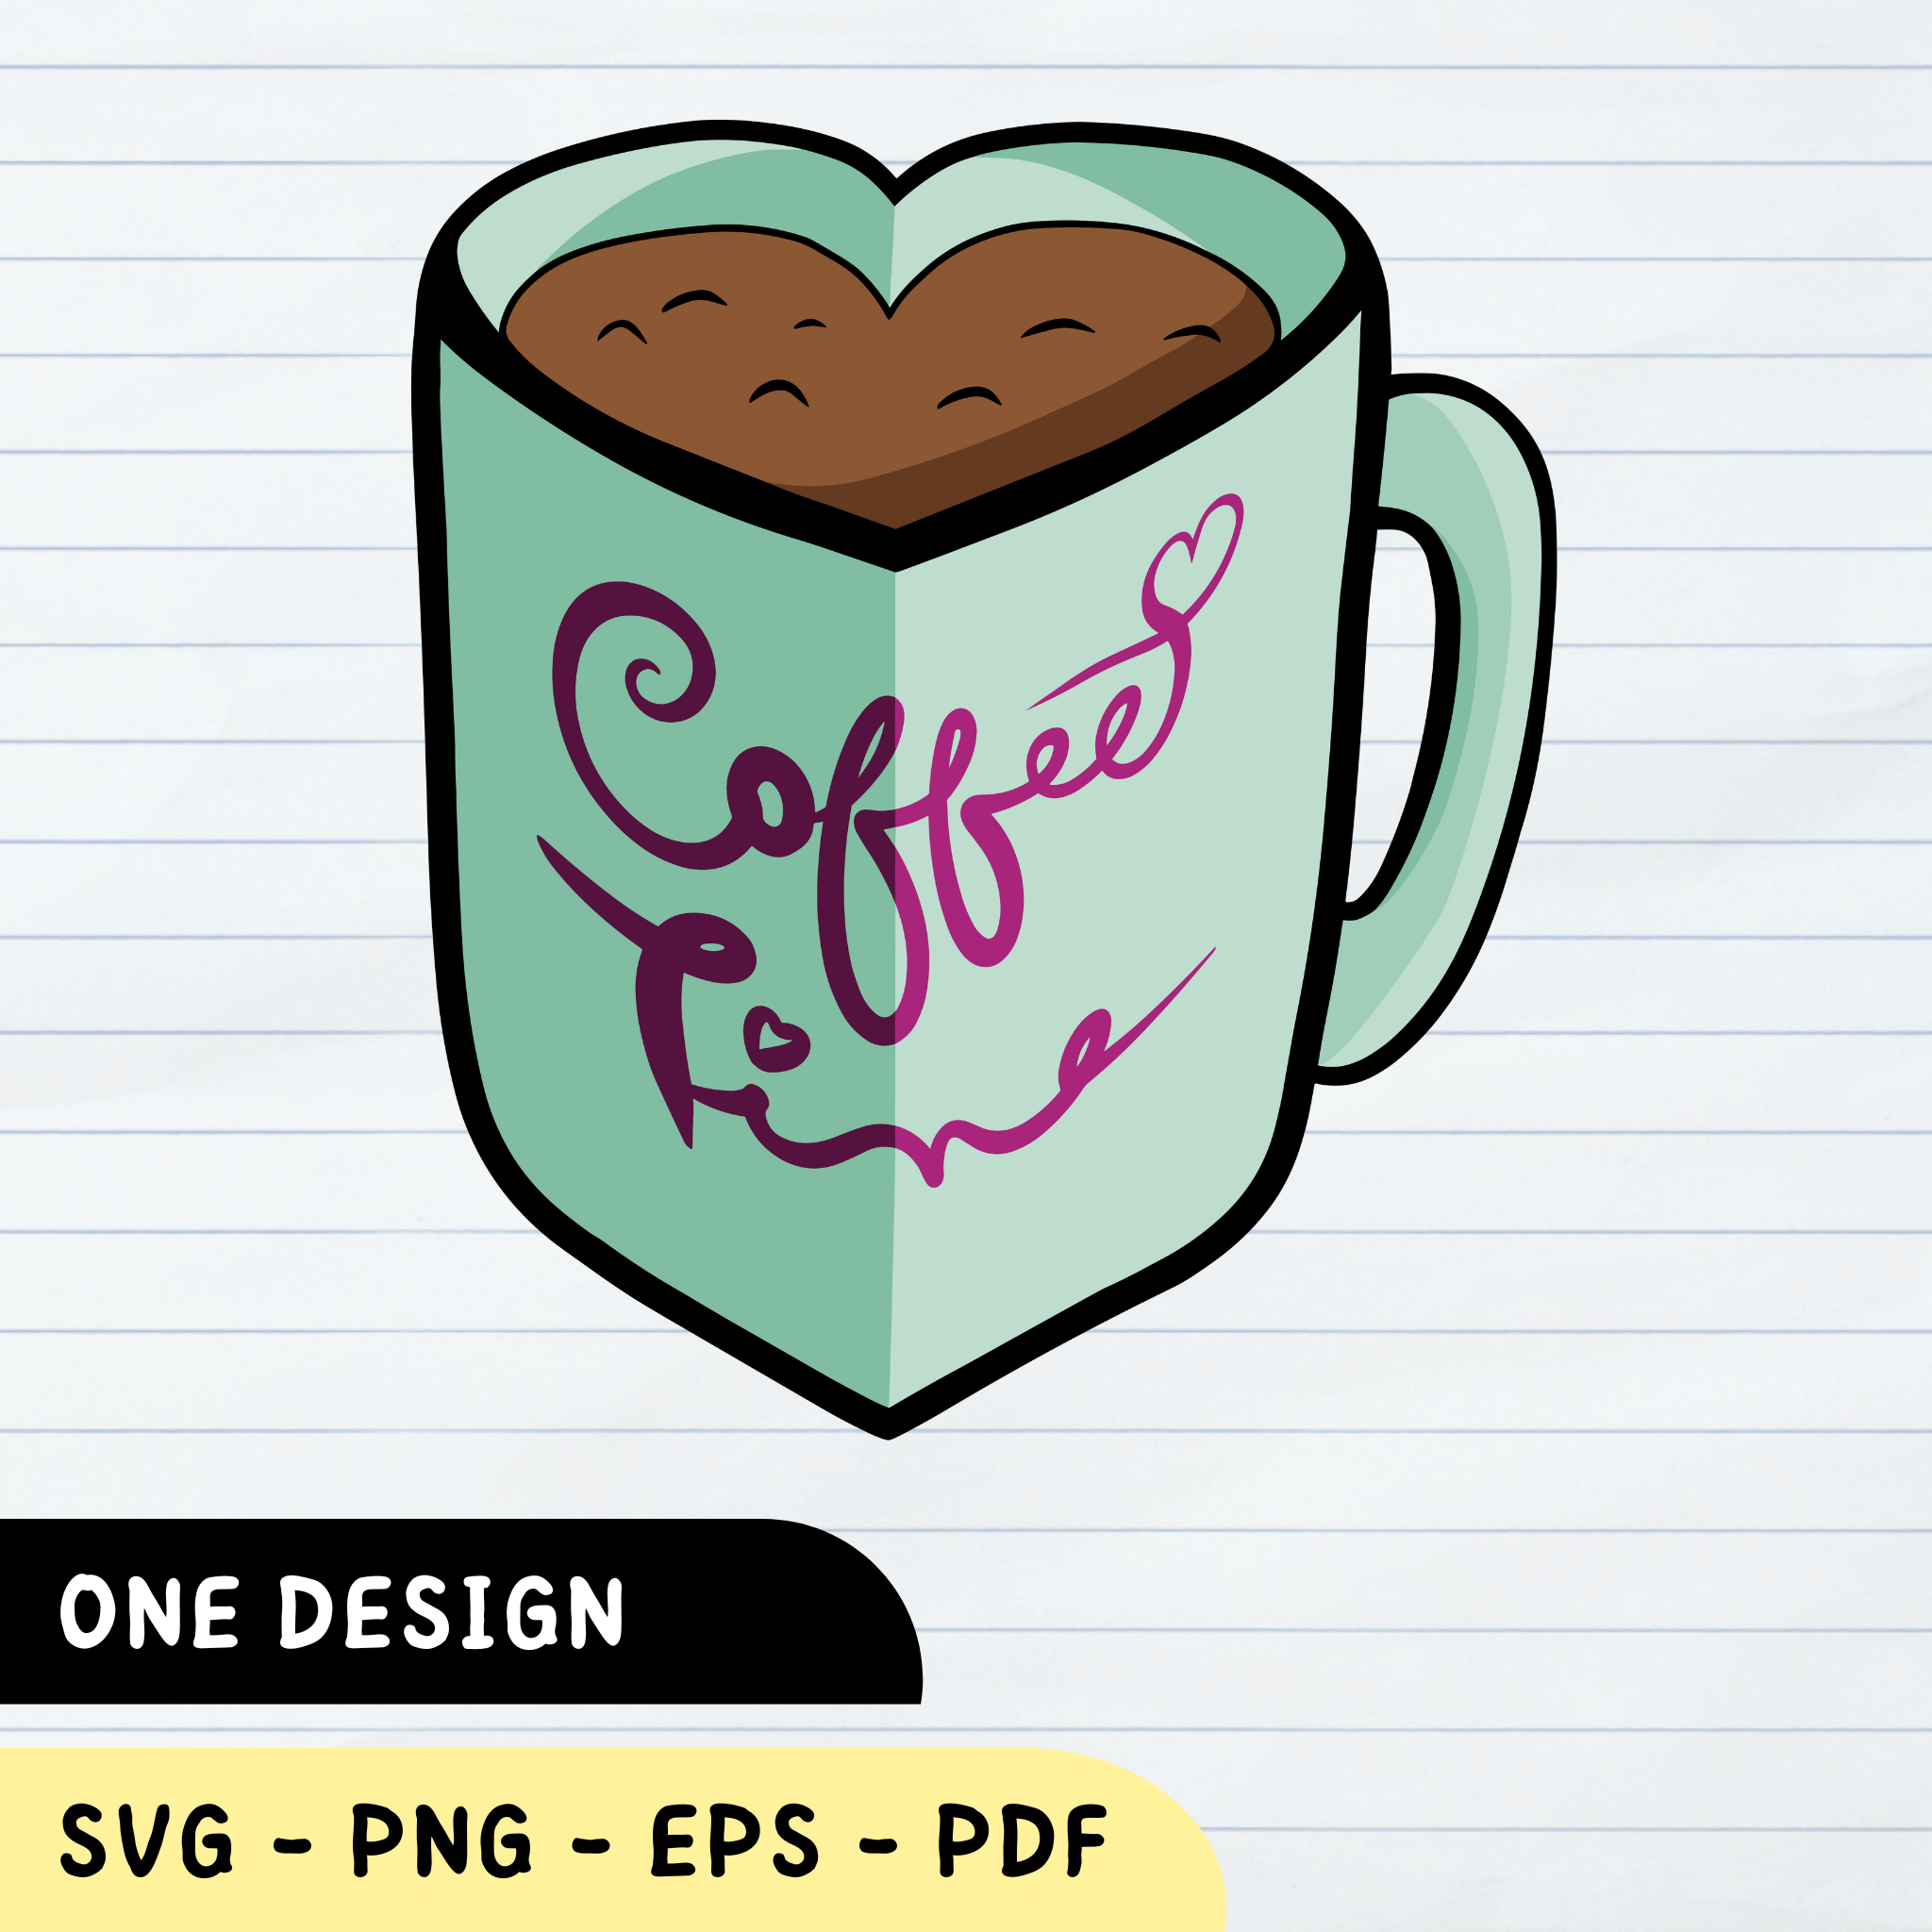 cute cup with coffee, vector drawing in doodle... - Stock Illustration  [109862074] - PIXTA